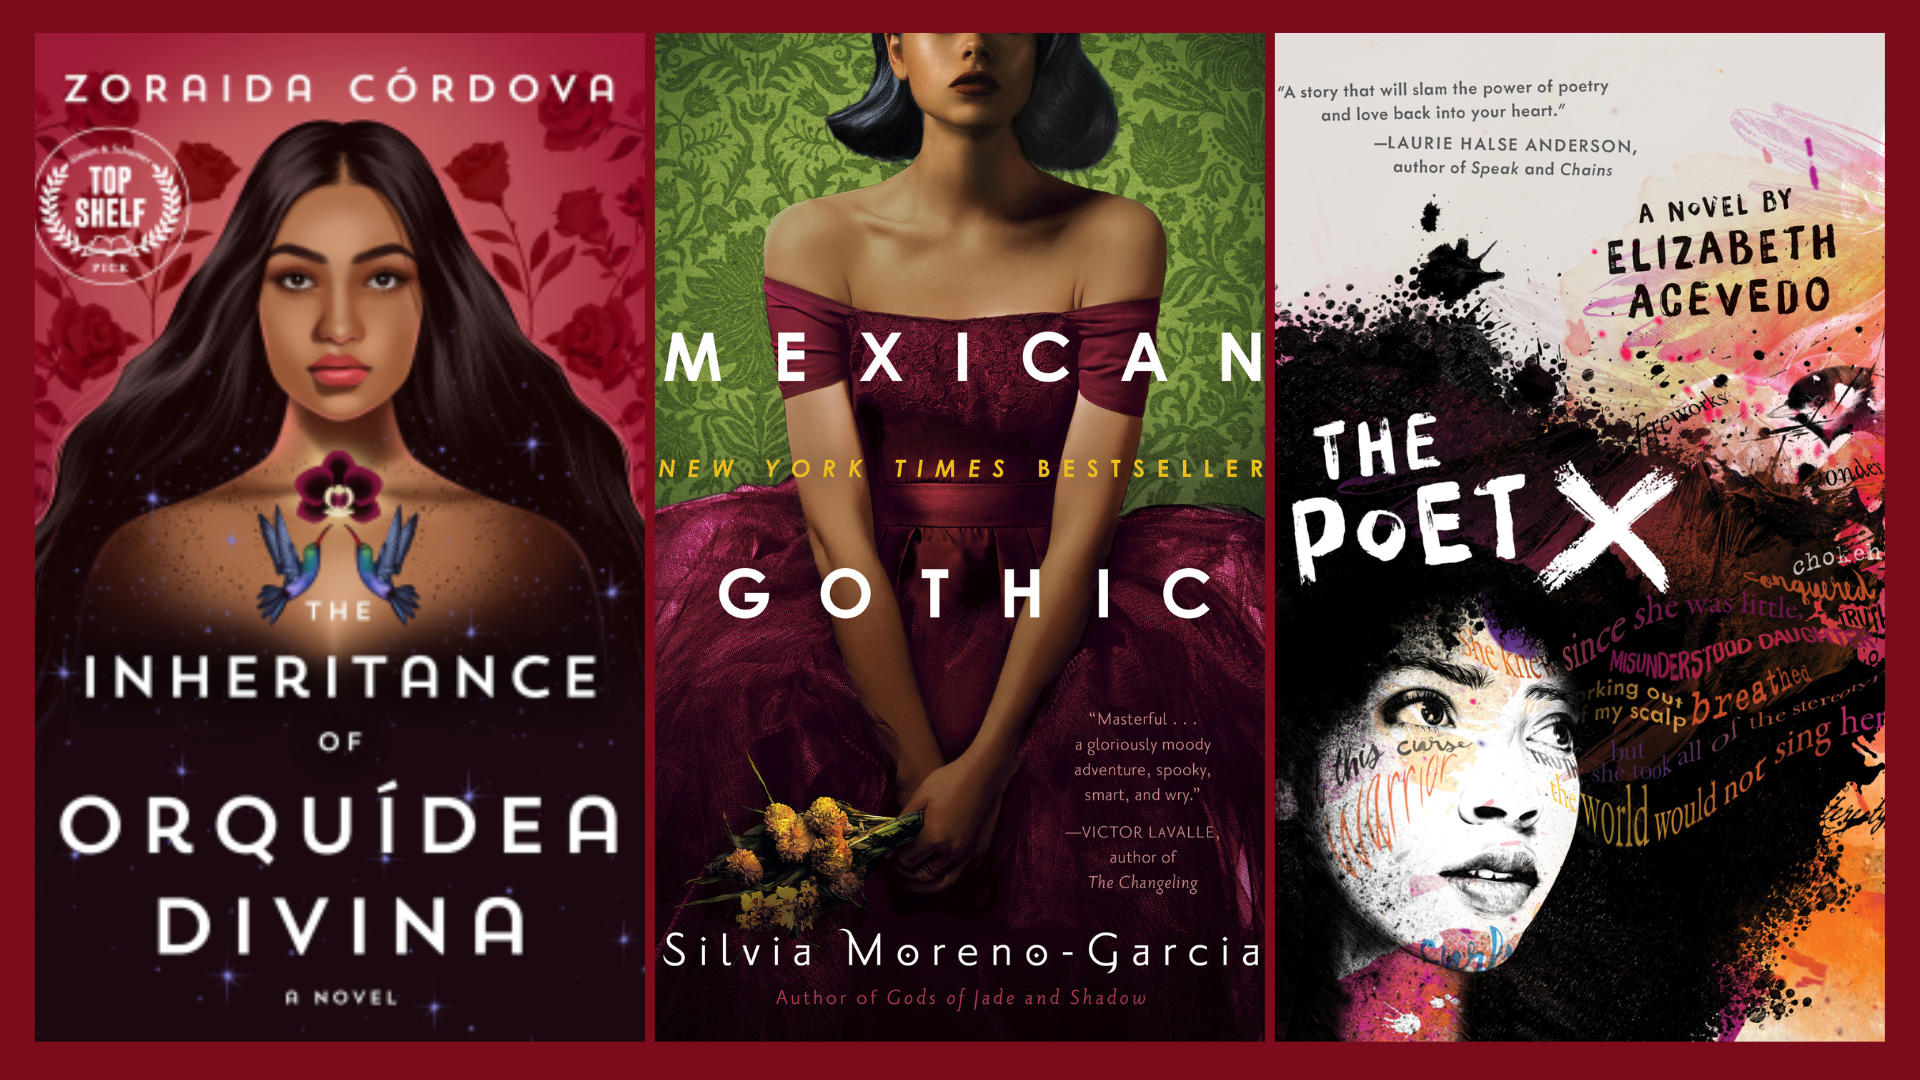 Image of three books covers: The Inheritance of Orquidea Divina; Mexican Gothic; The Poet X